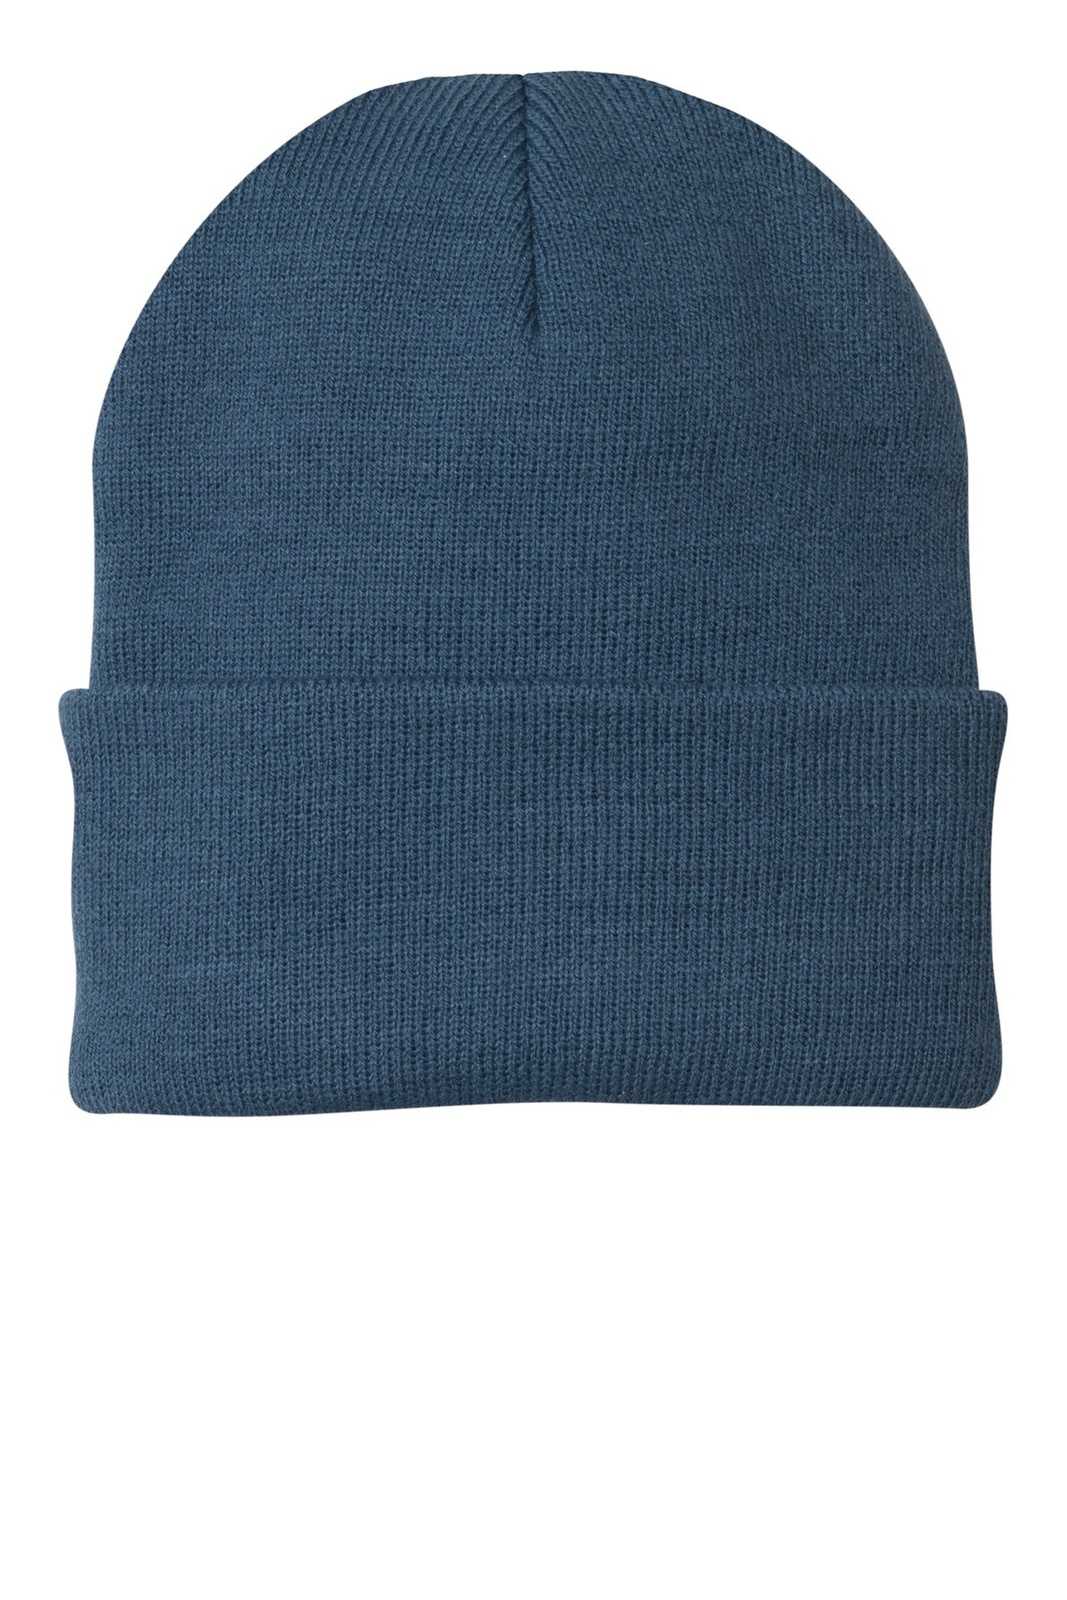 Port & Company CP90 Knit Cap with Cuff - Millennium Blue - HIT a Double - 1